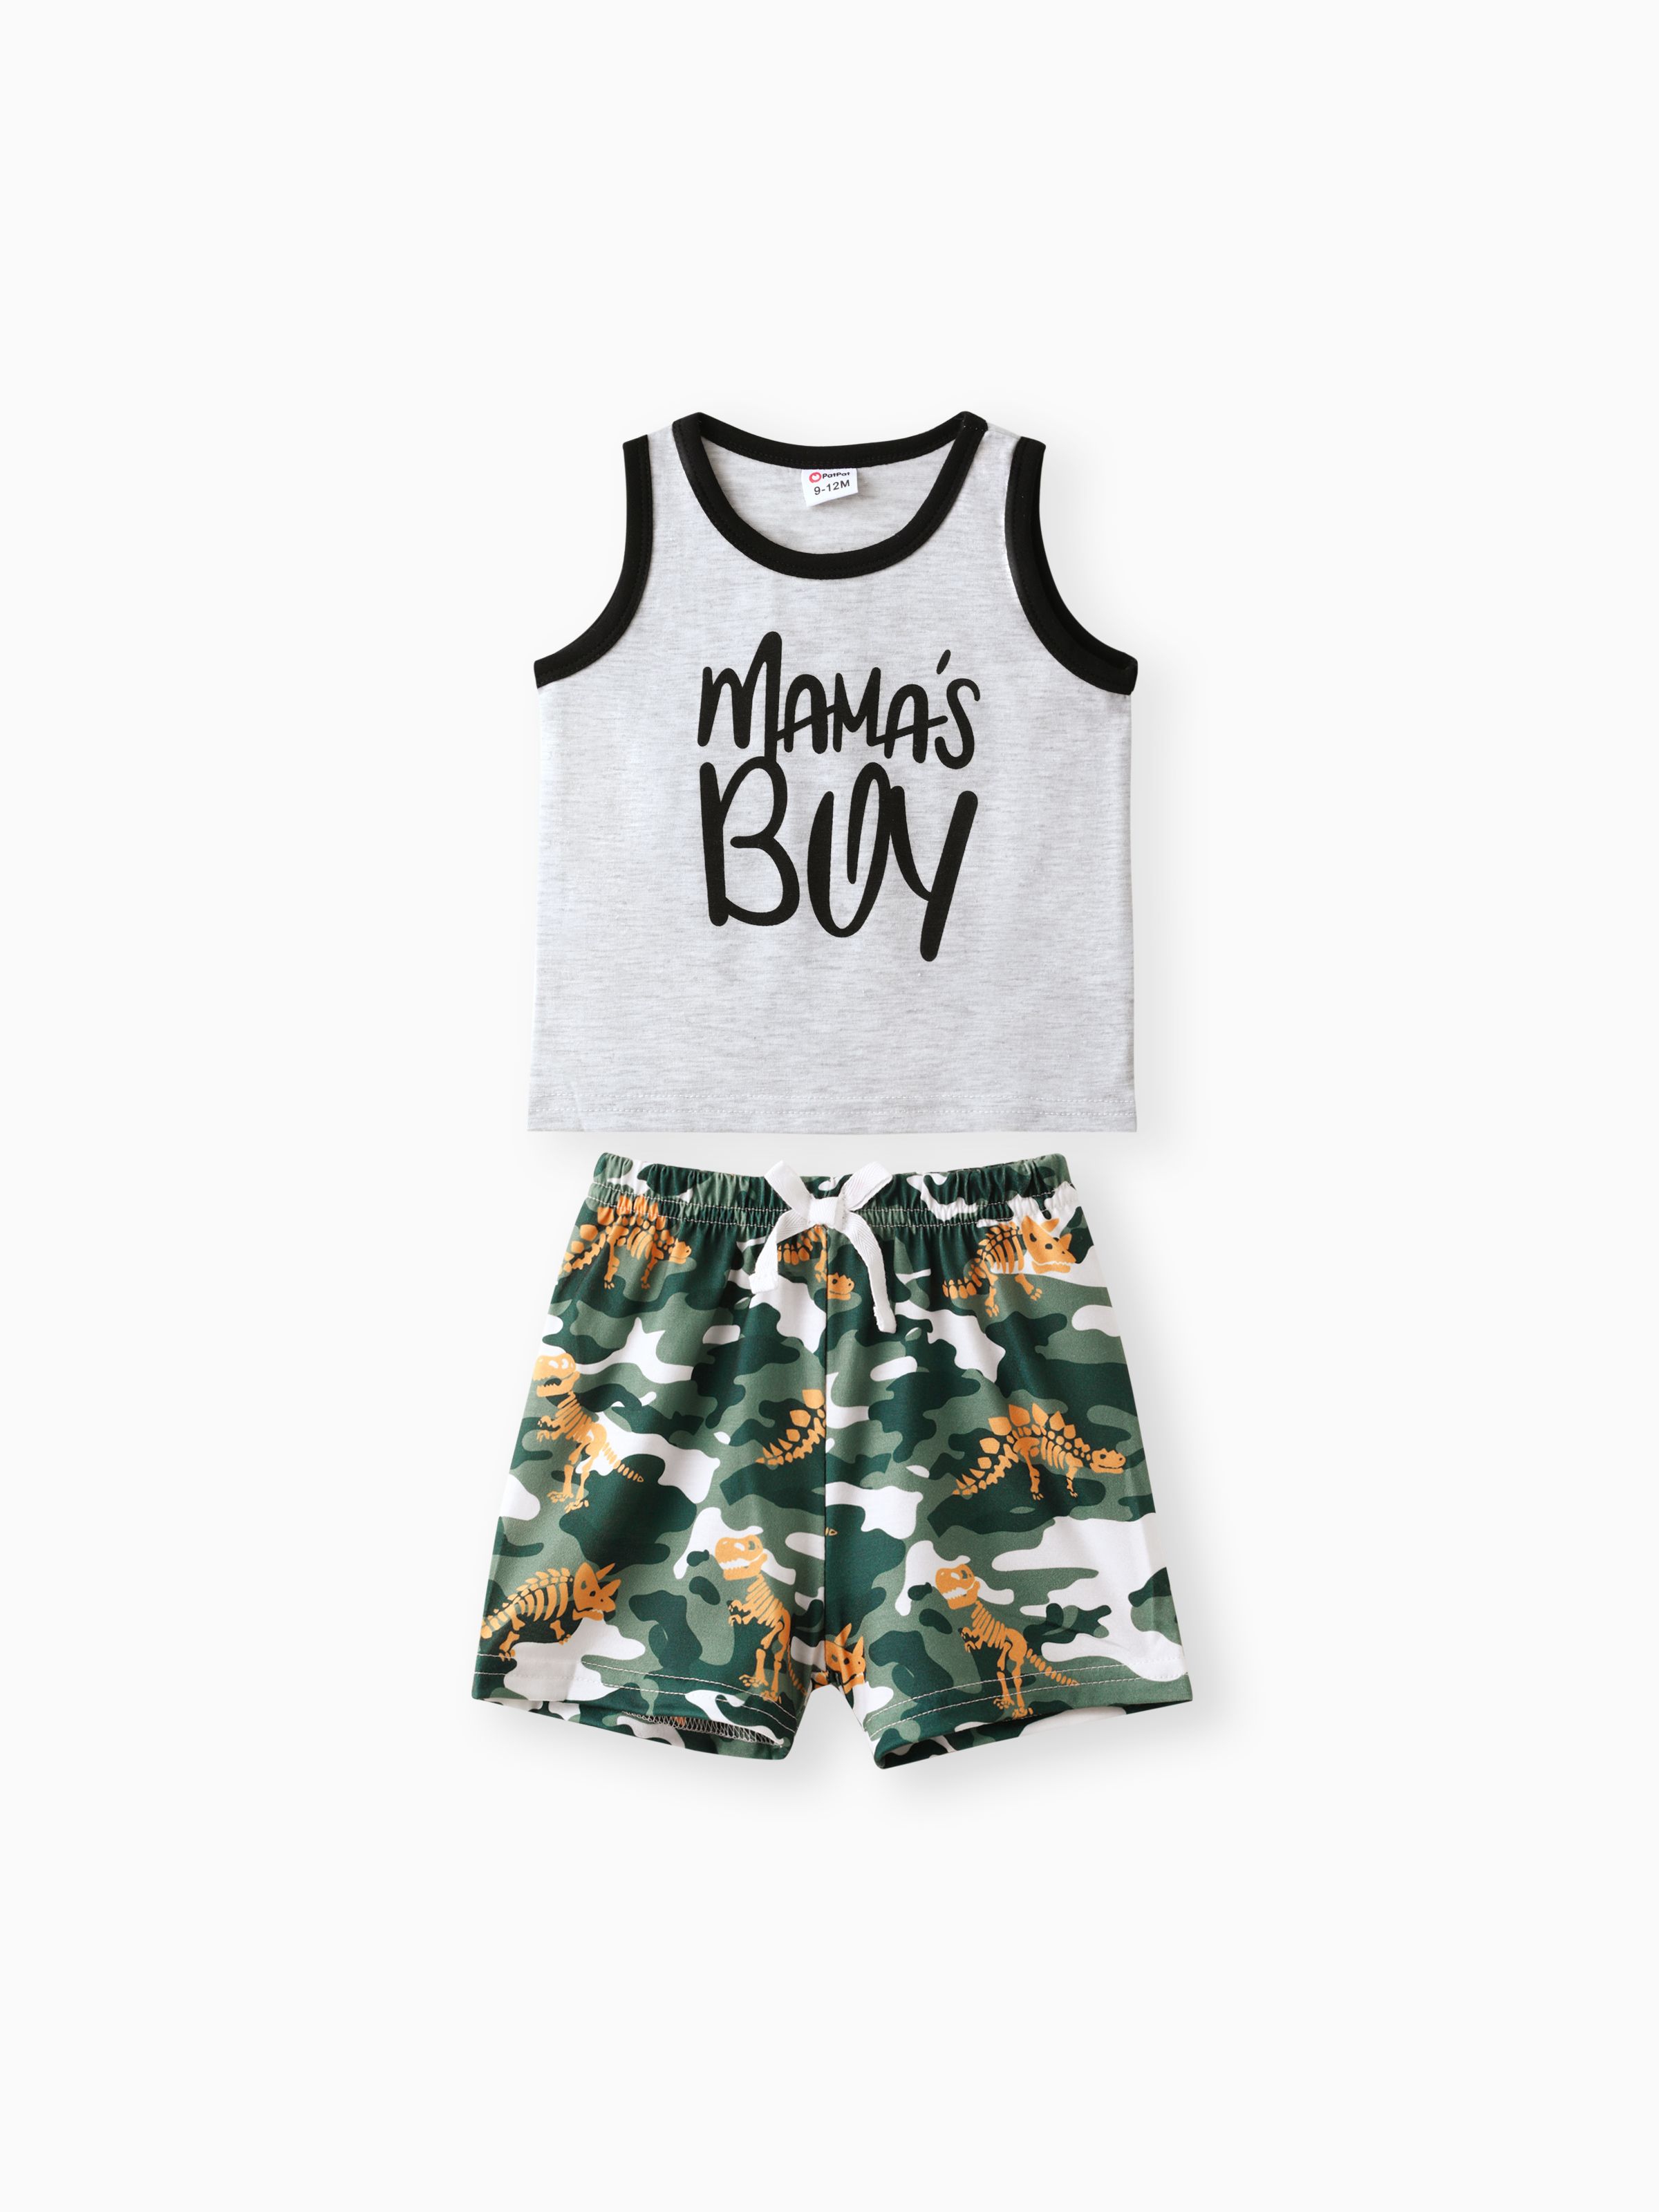 

2pcs Baby Boy Letter Print Tank Top and Camouflage Shorts Set